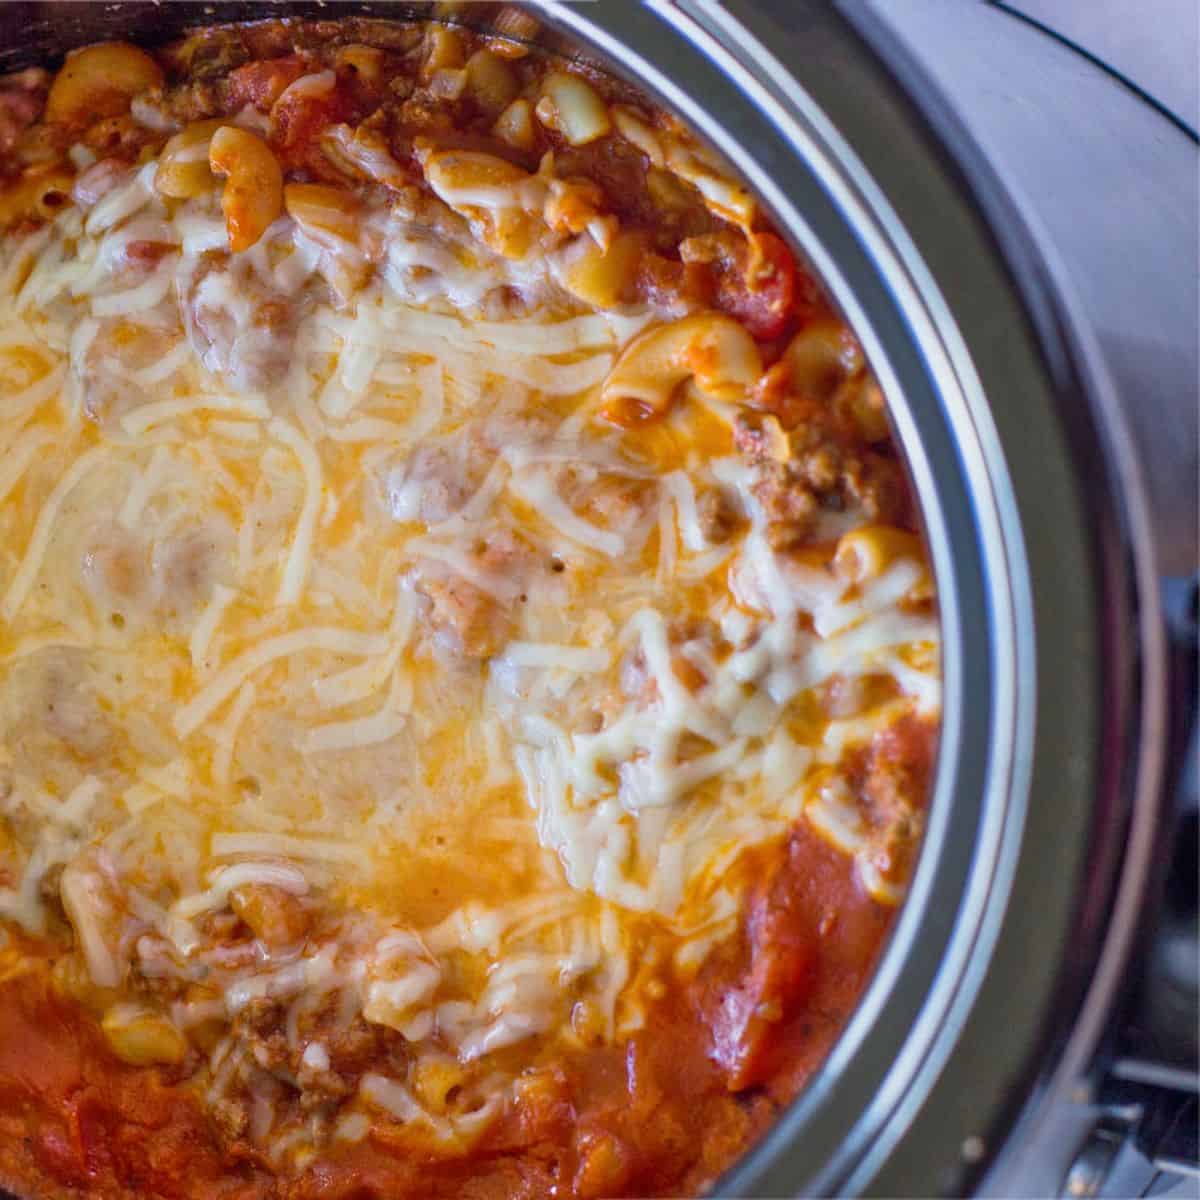 15. Slow Cooker Italian Ground Beef and Cheese Pasta - Italian beef recipes for Crock Pot